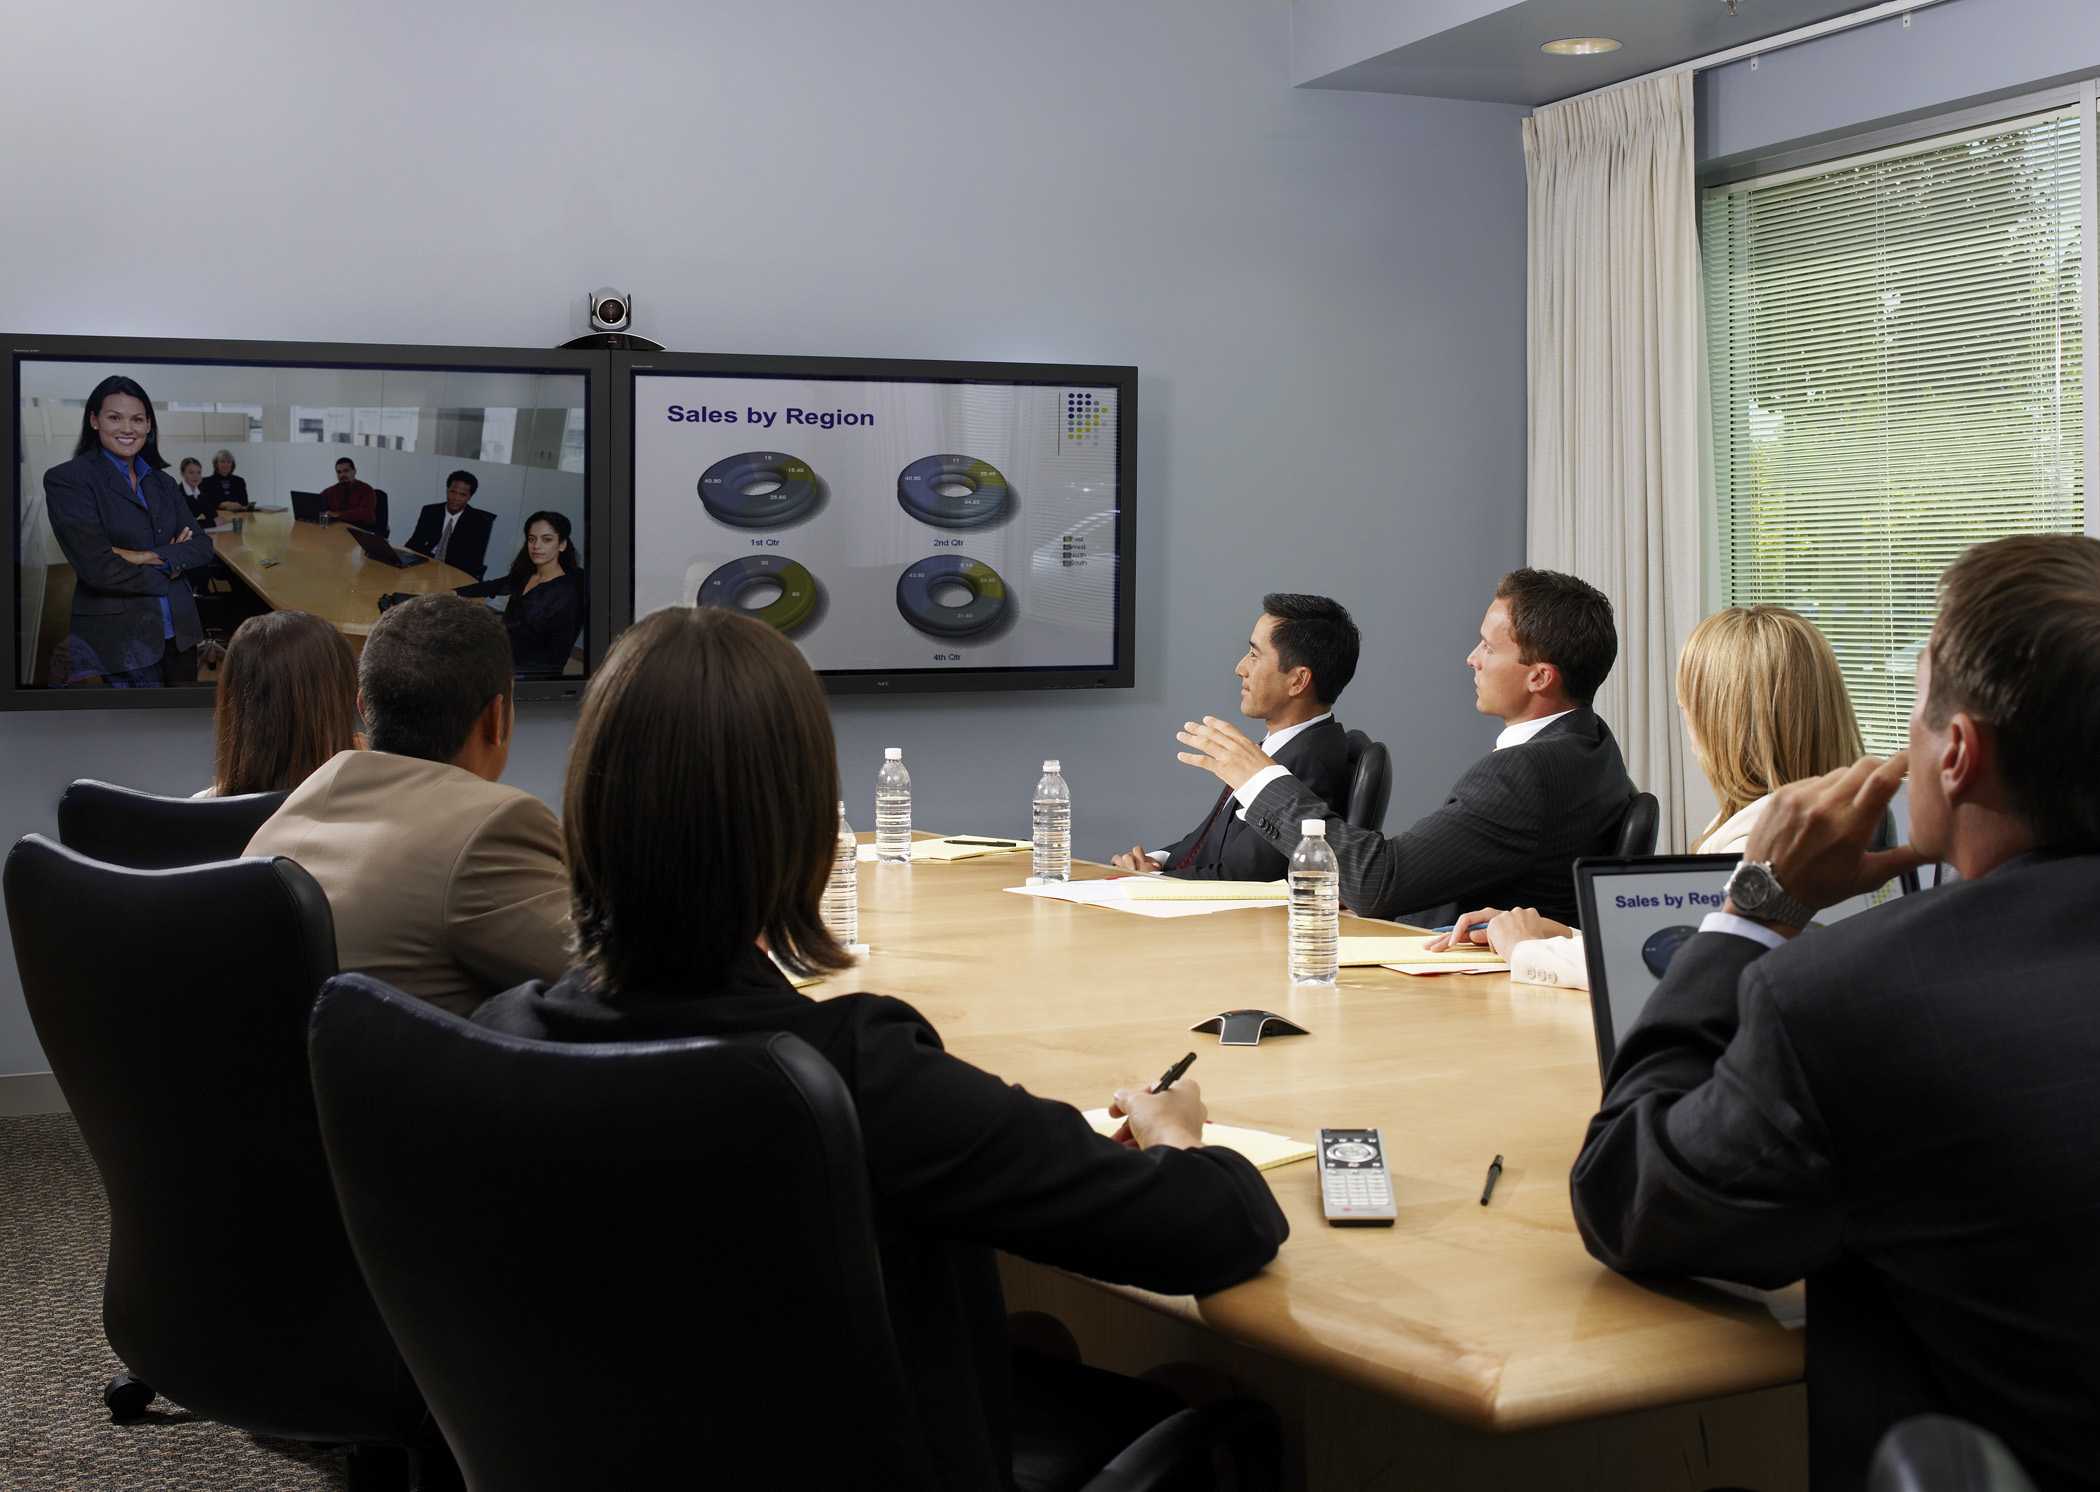 skype video conferencing systems